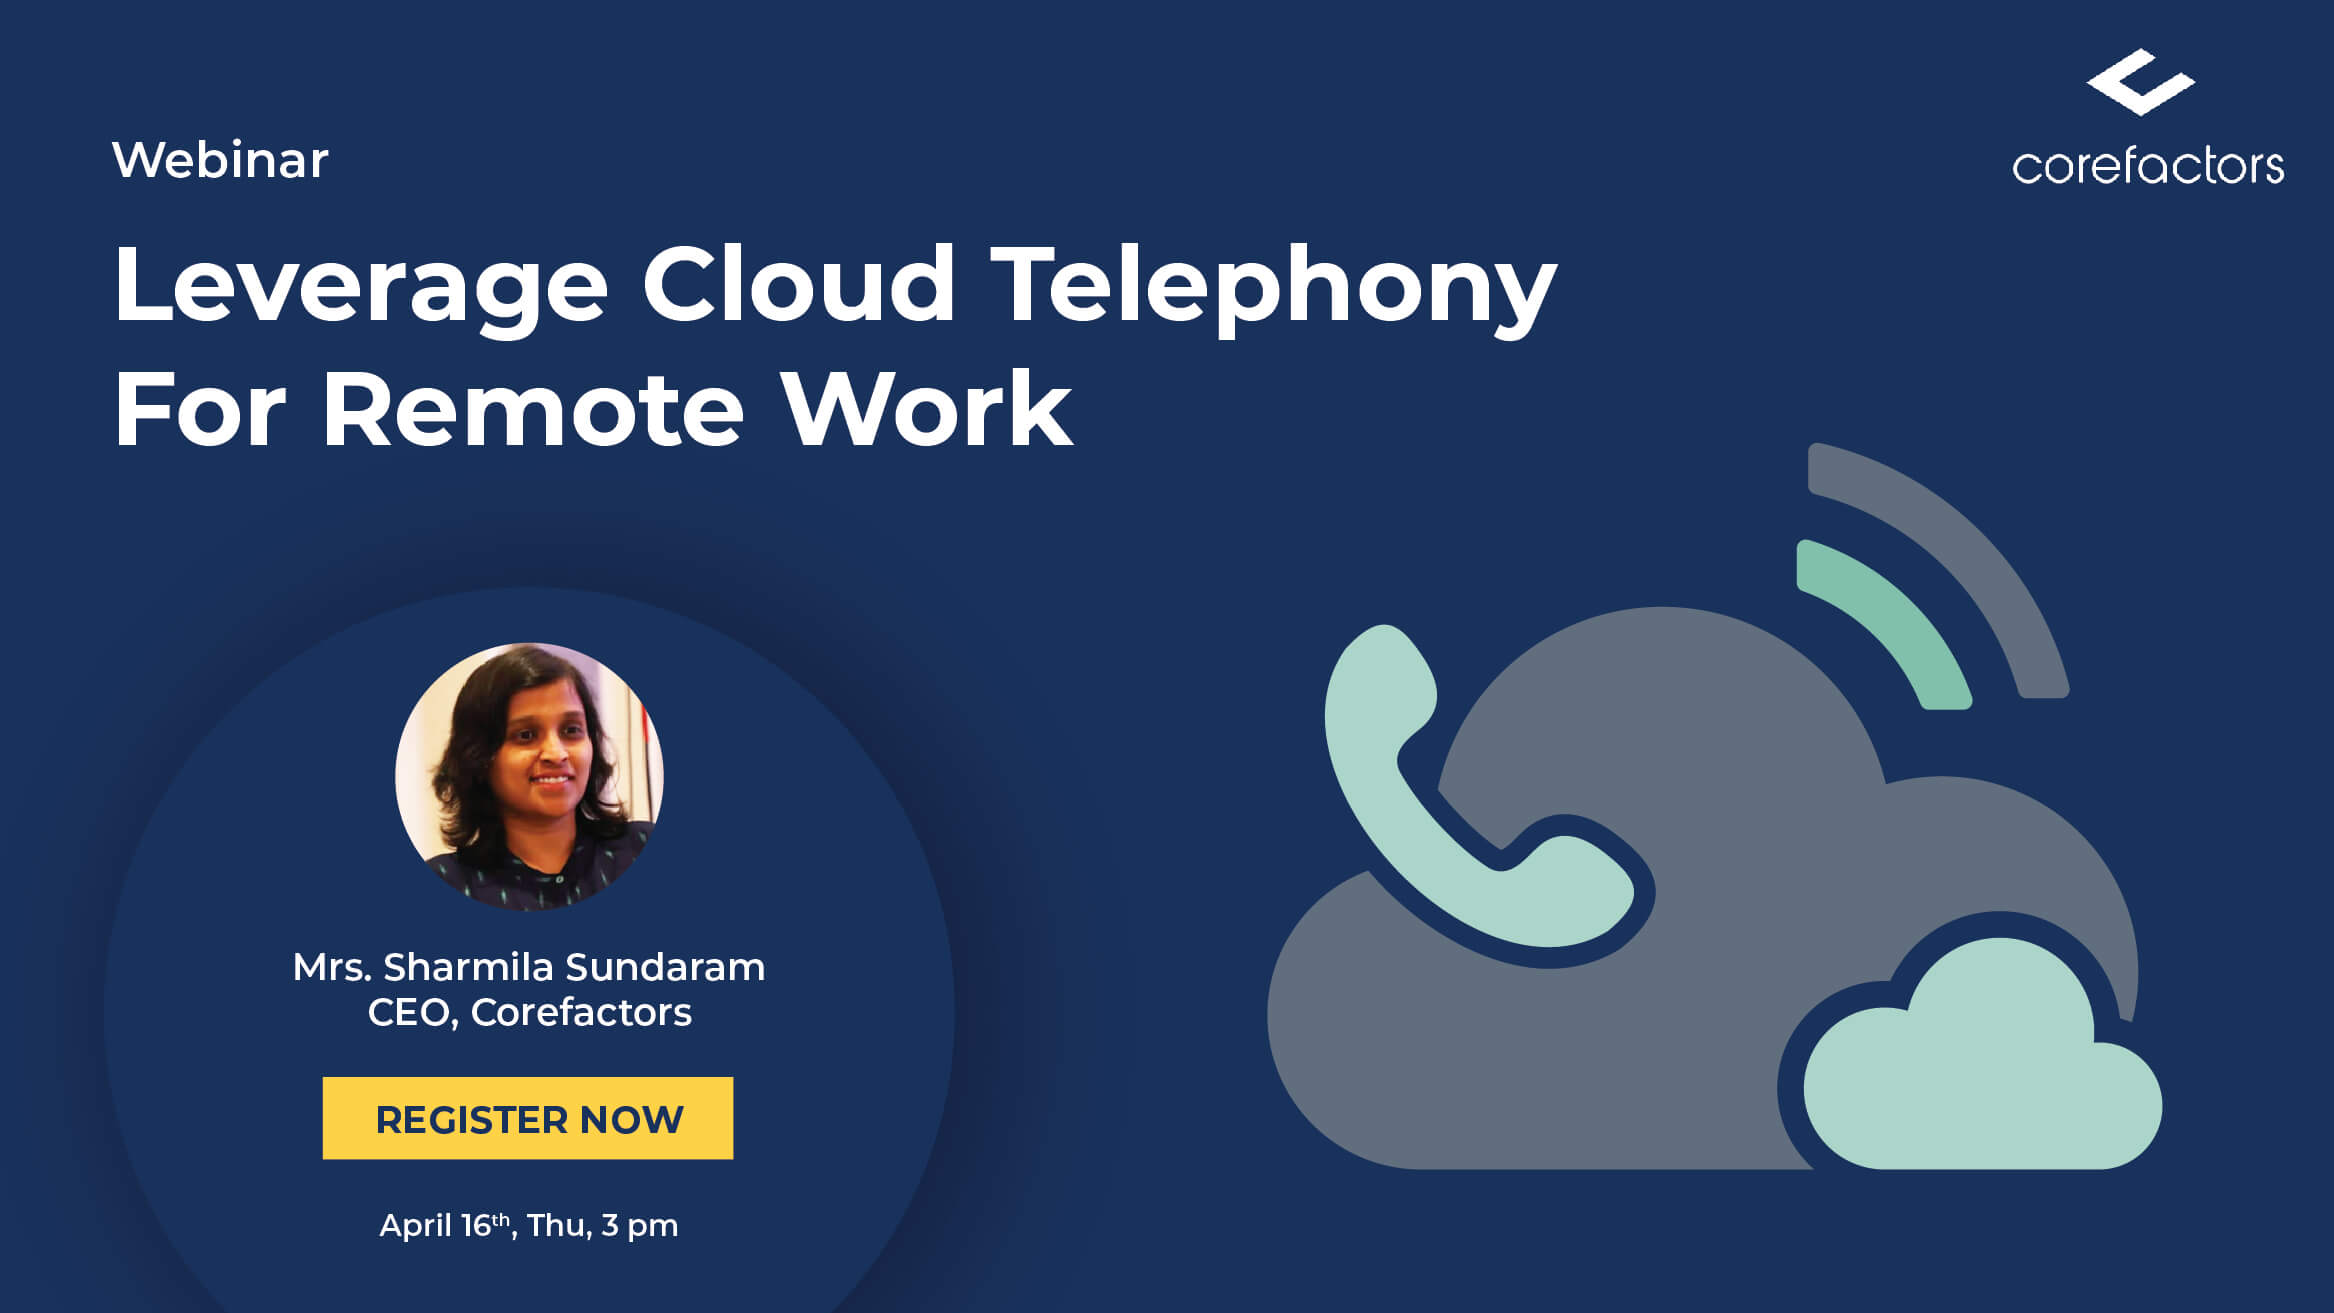 How To Choose The Right Cloud Telephony Solution To Work Remotely